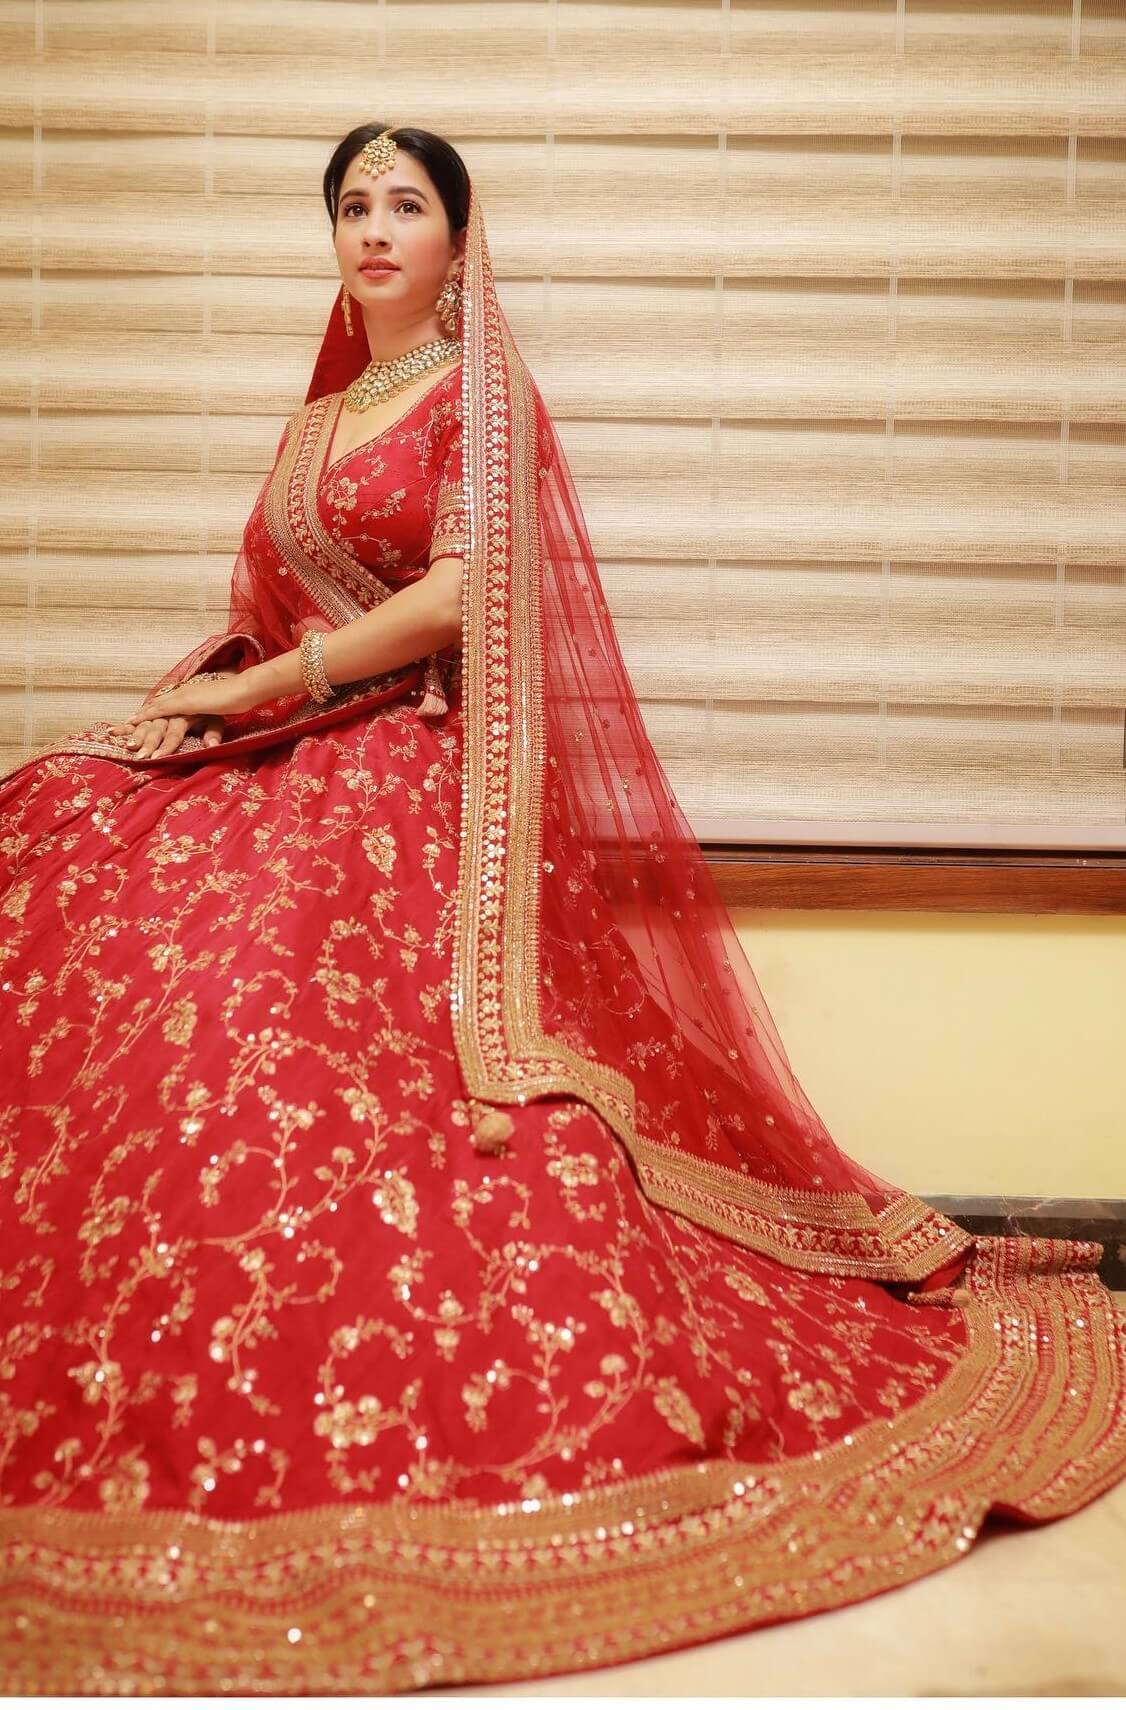 Manvitha Kamath Look Exquisite In Red Golden Embroidery Bridal Lehenga